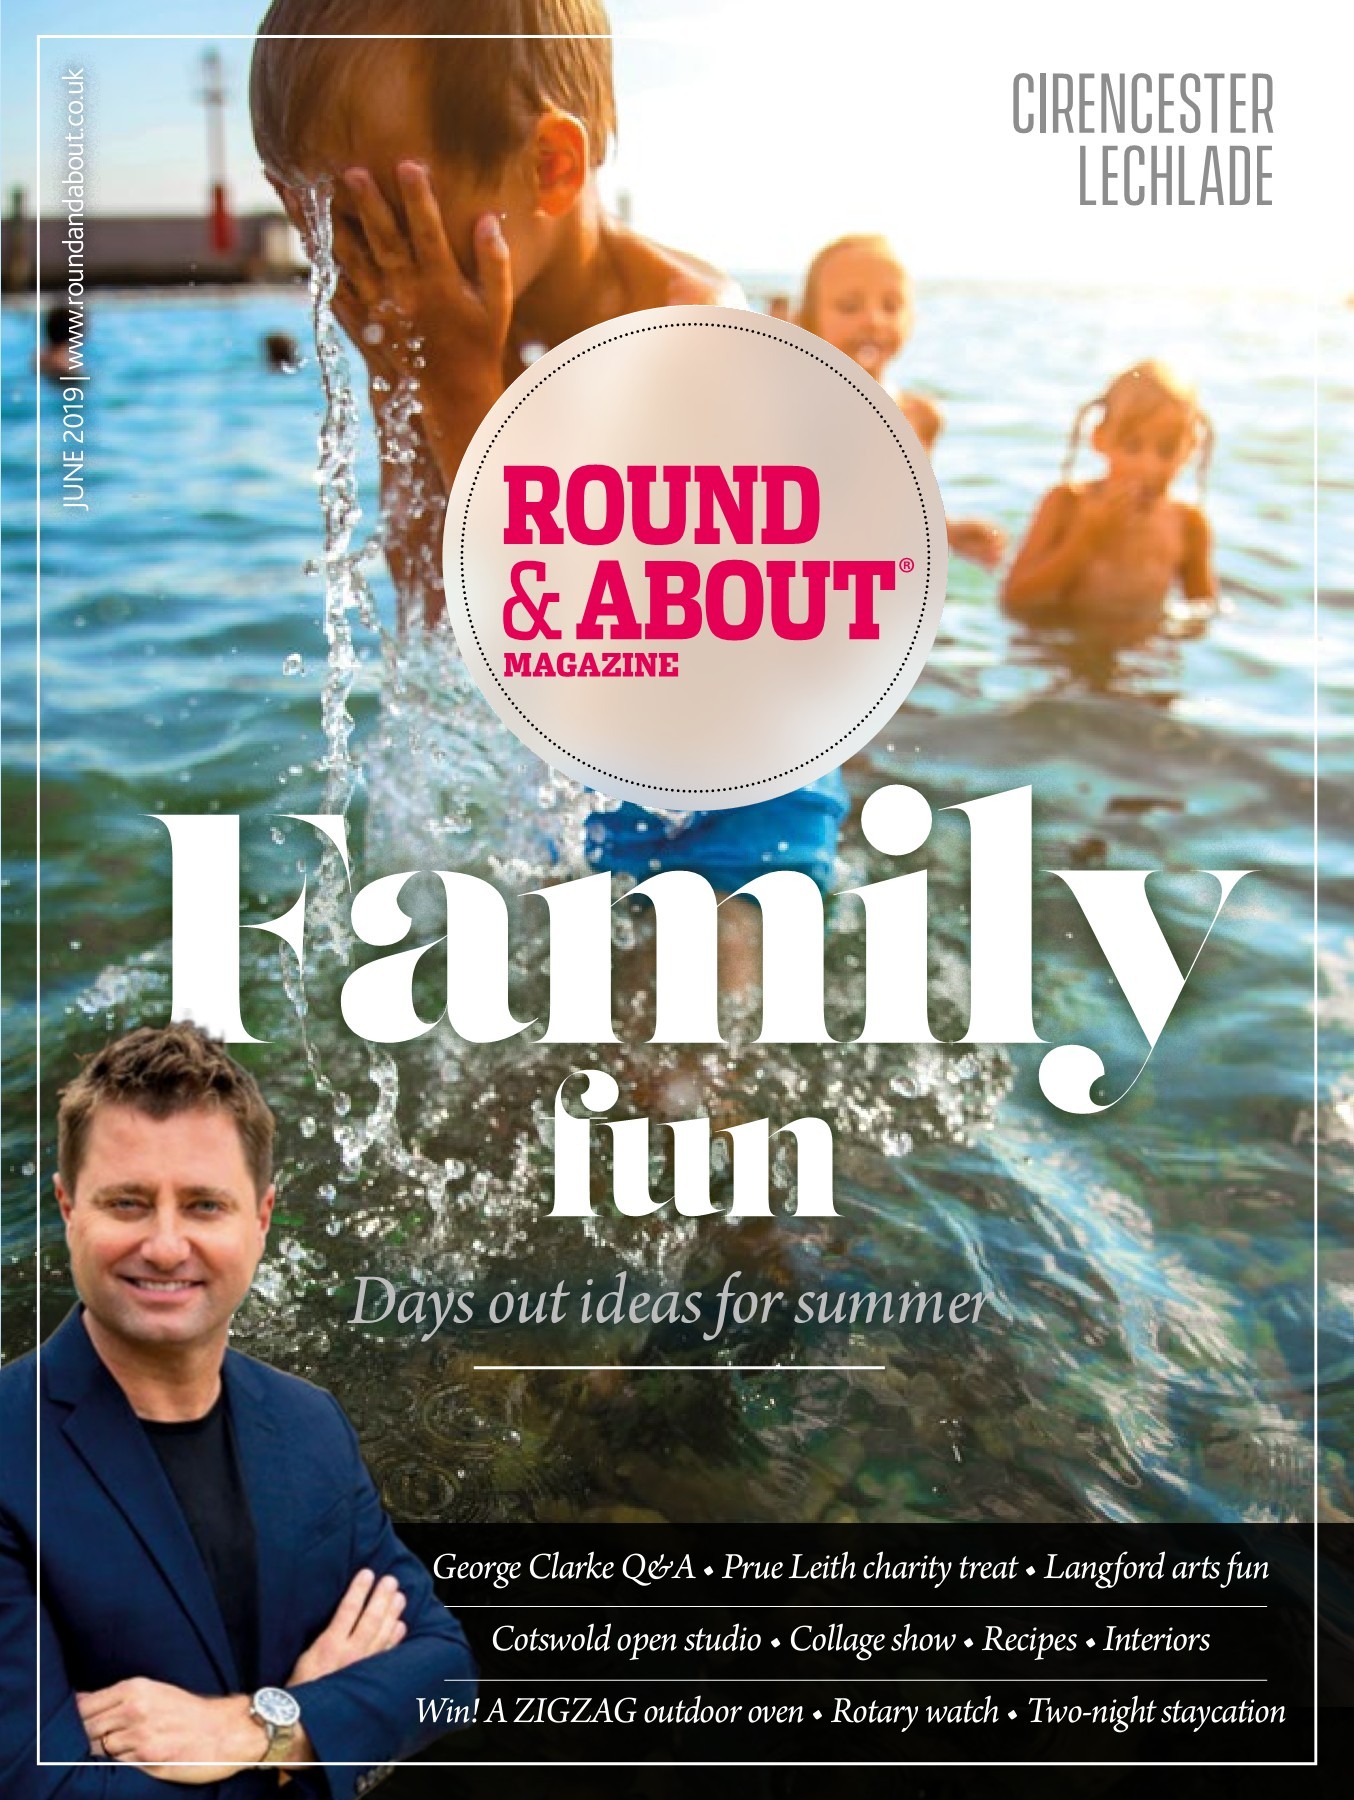 Round and About magazine